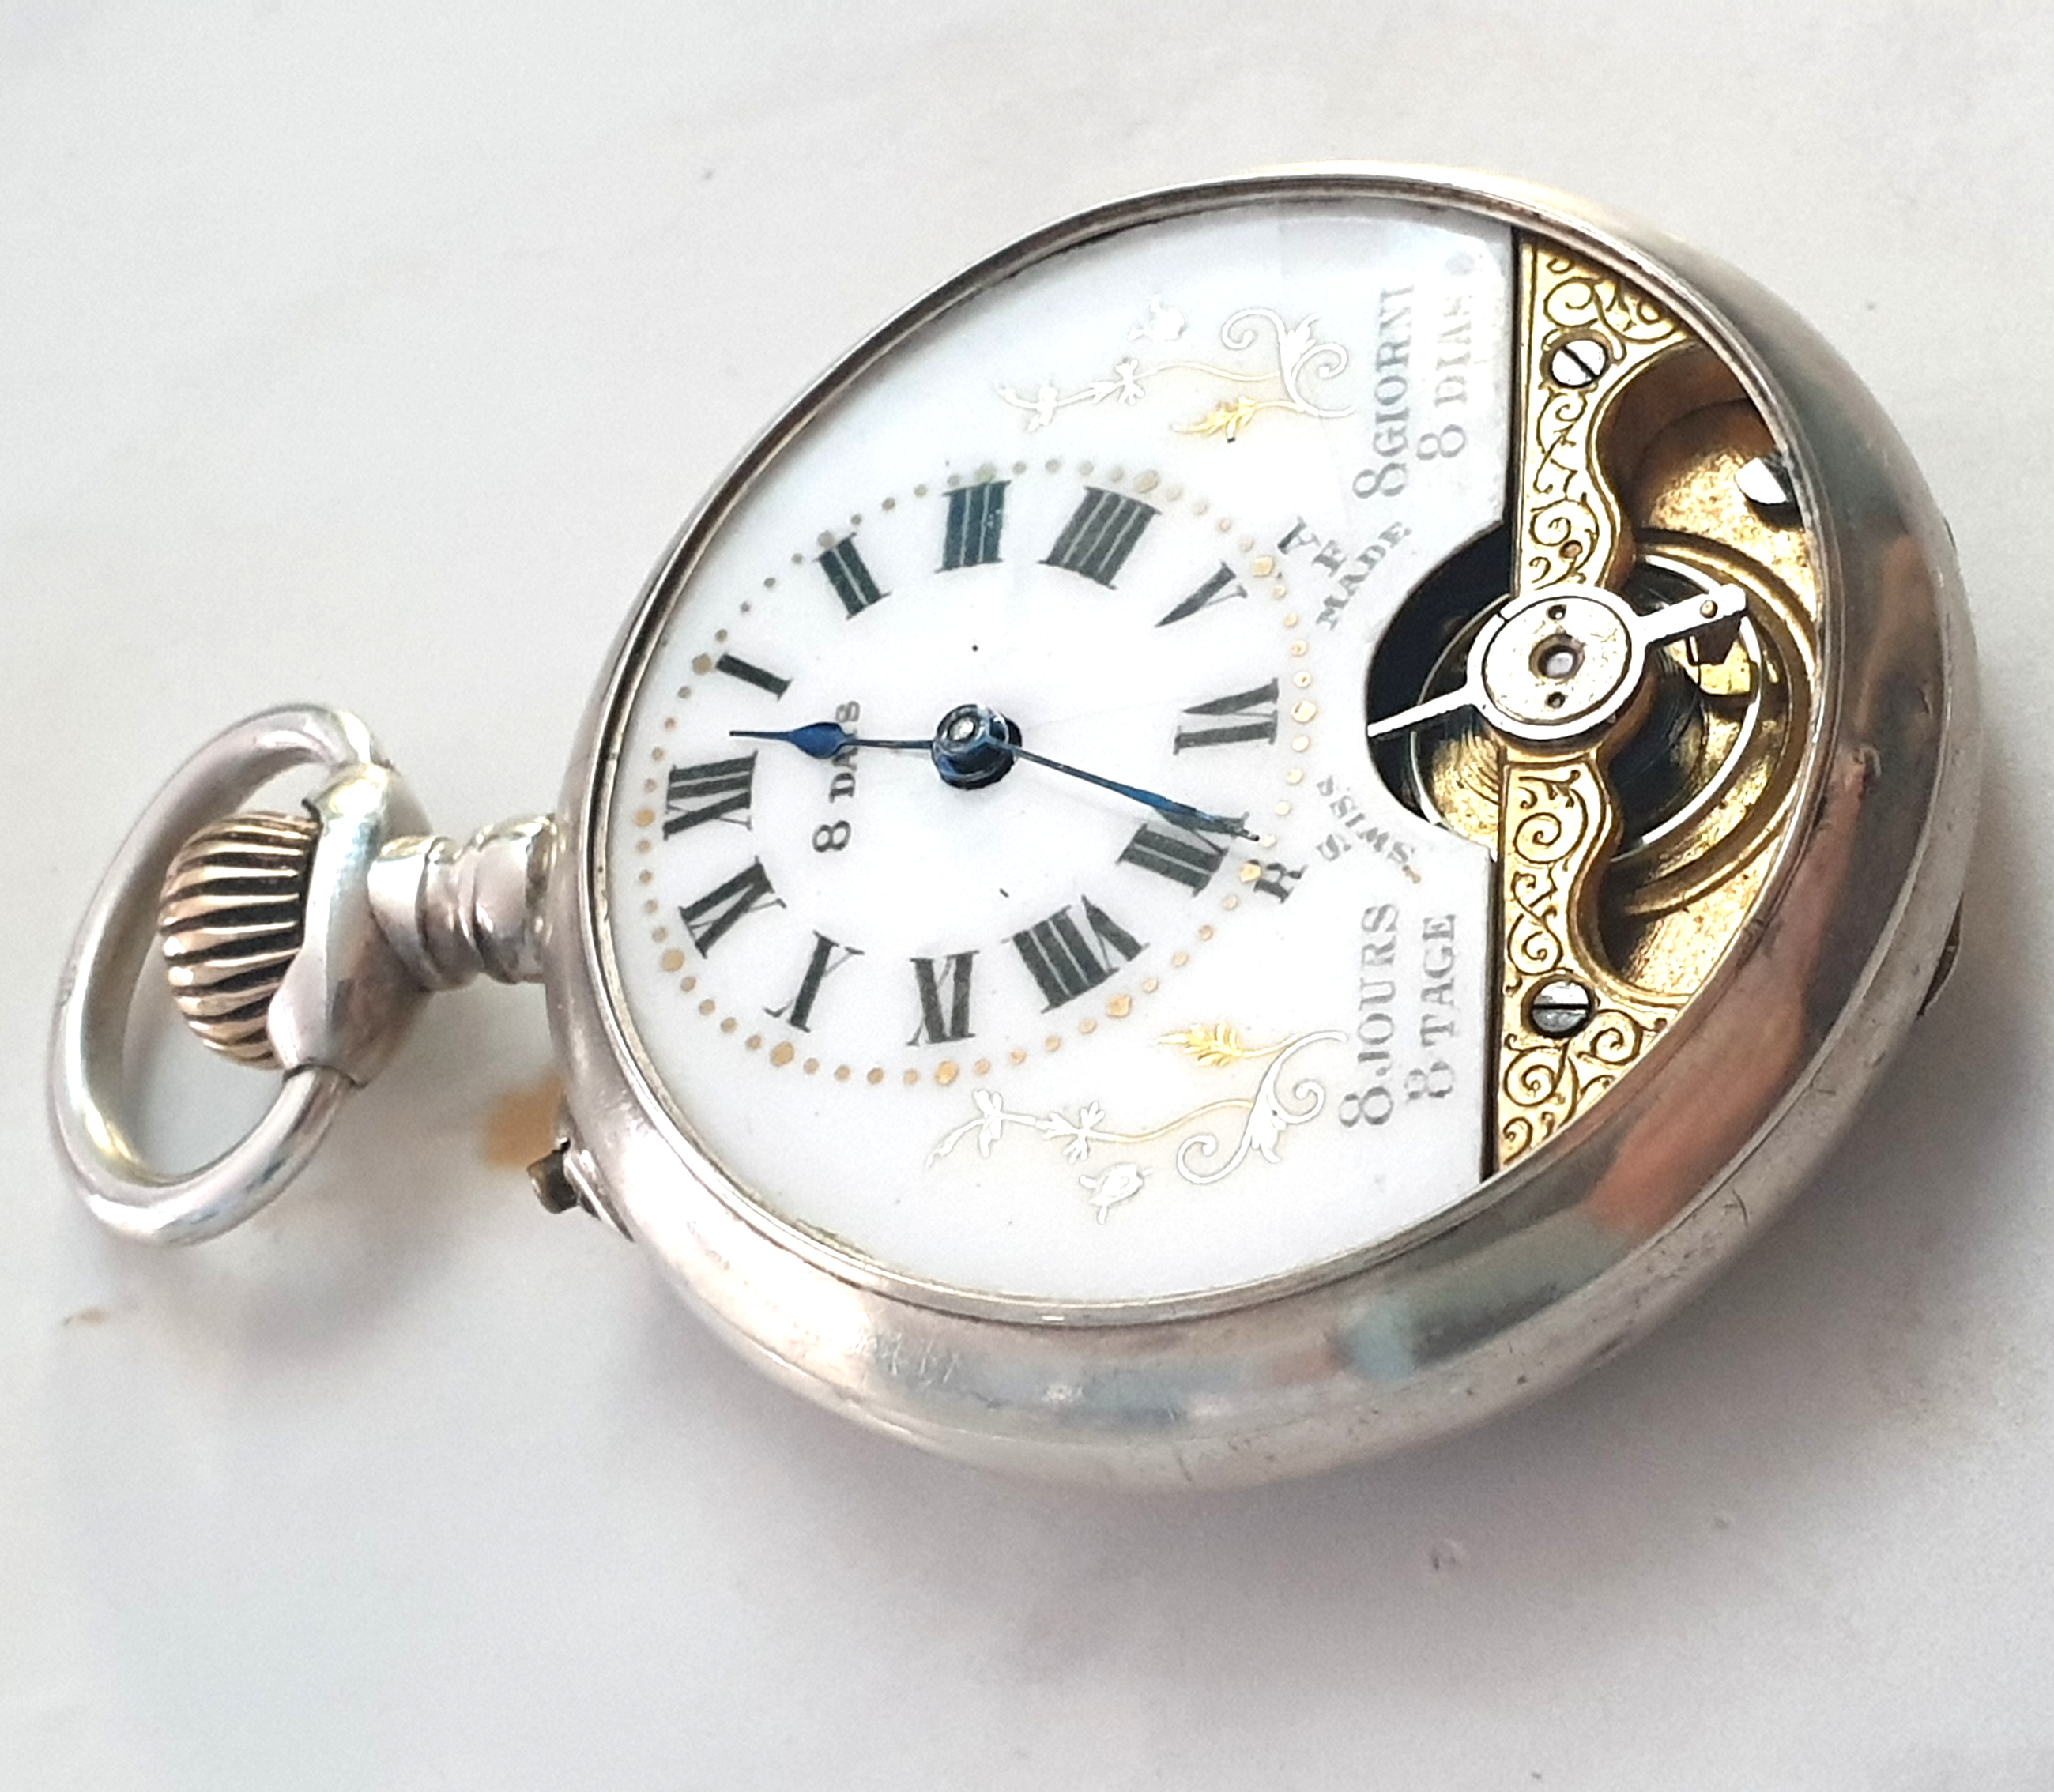 8 DAY HEBDOMAS TOP WIND POCKET WATCH WITH ENAMELLED DIAL AND VISIBLE ESCAPEMENT IN STERLING SILVER - Image 3 of 13